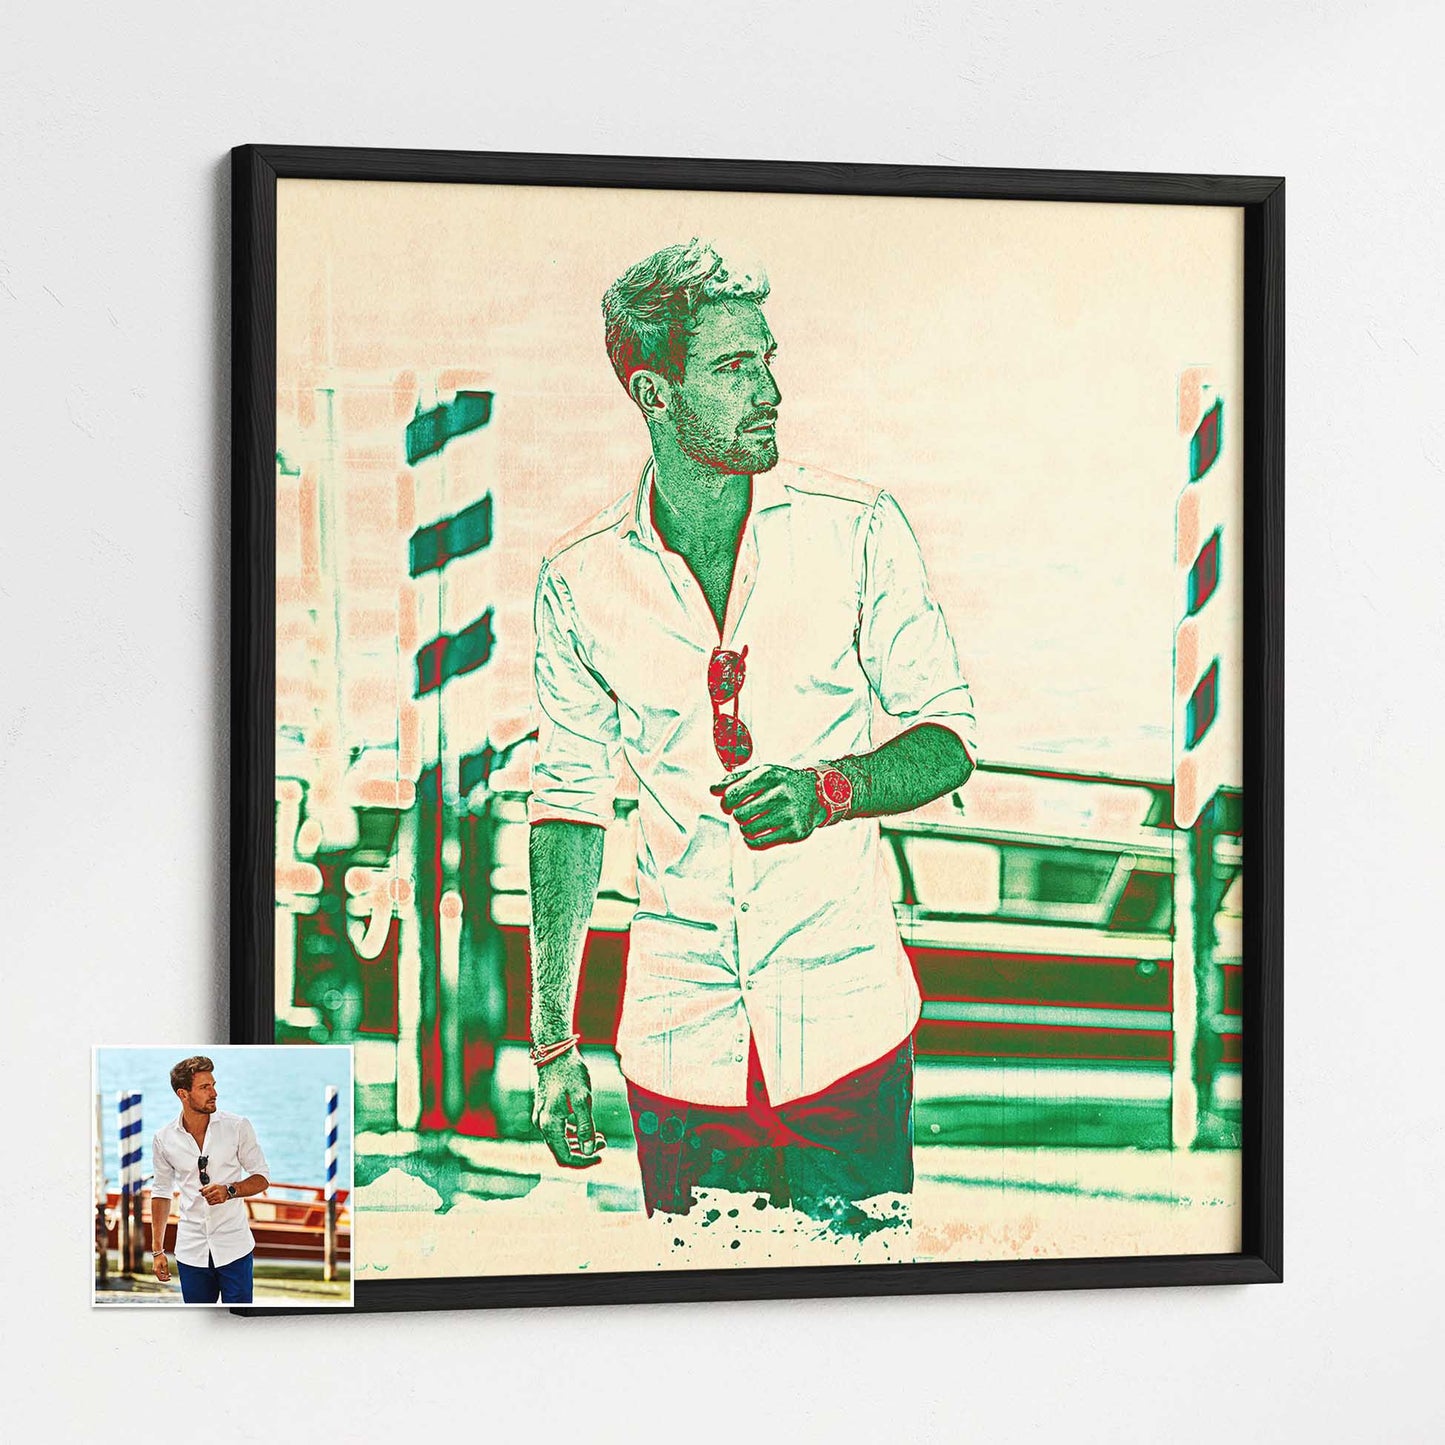 Unique Artwork for Home Decor: Elevate your home decor with this personalised red and green framed print. Its artistic watercolour style and imaginative interpretation of your photo make it a standout piece, printed on museum-quality paper 